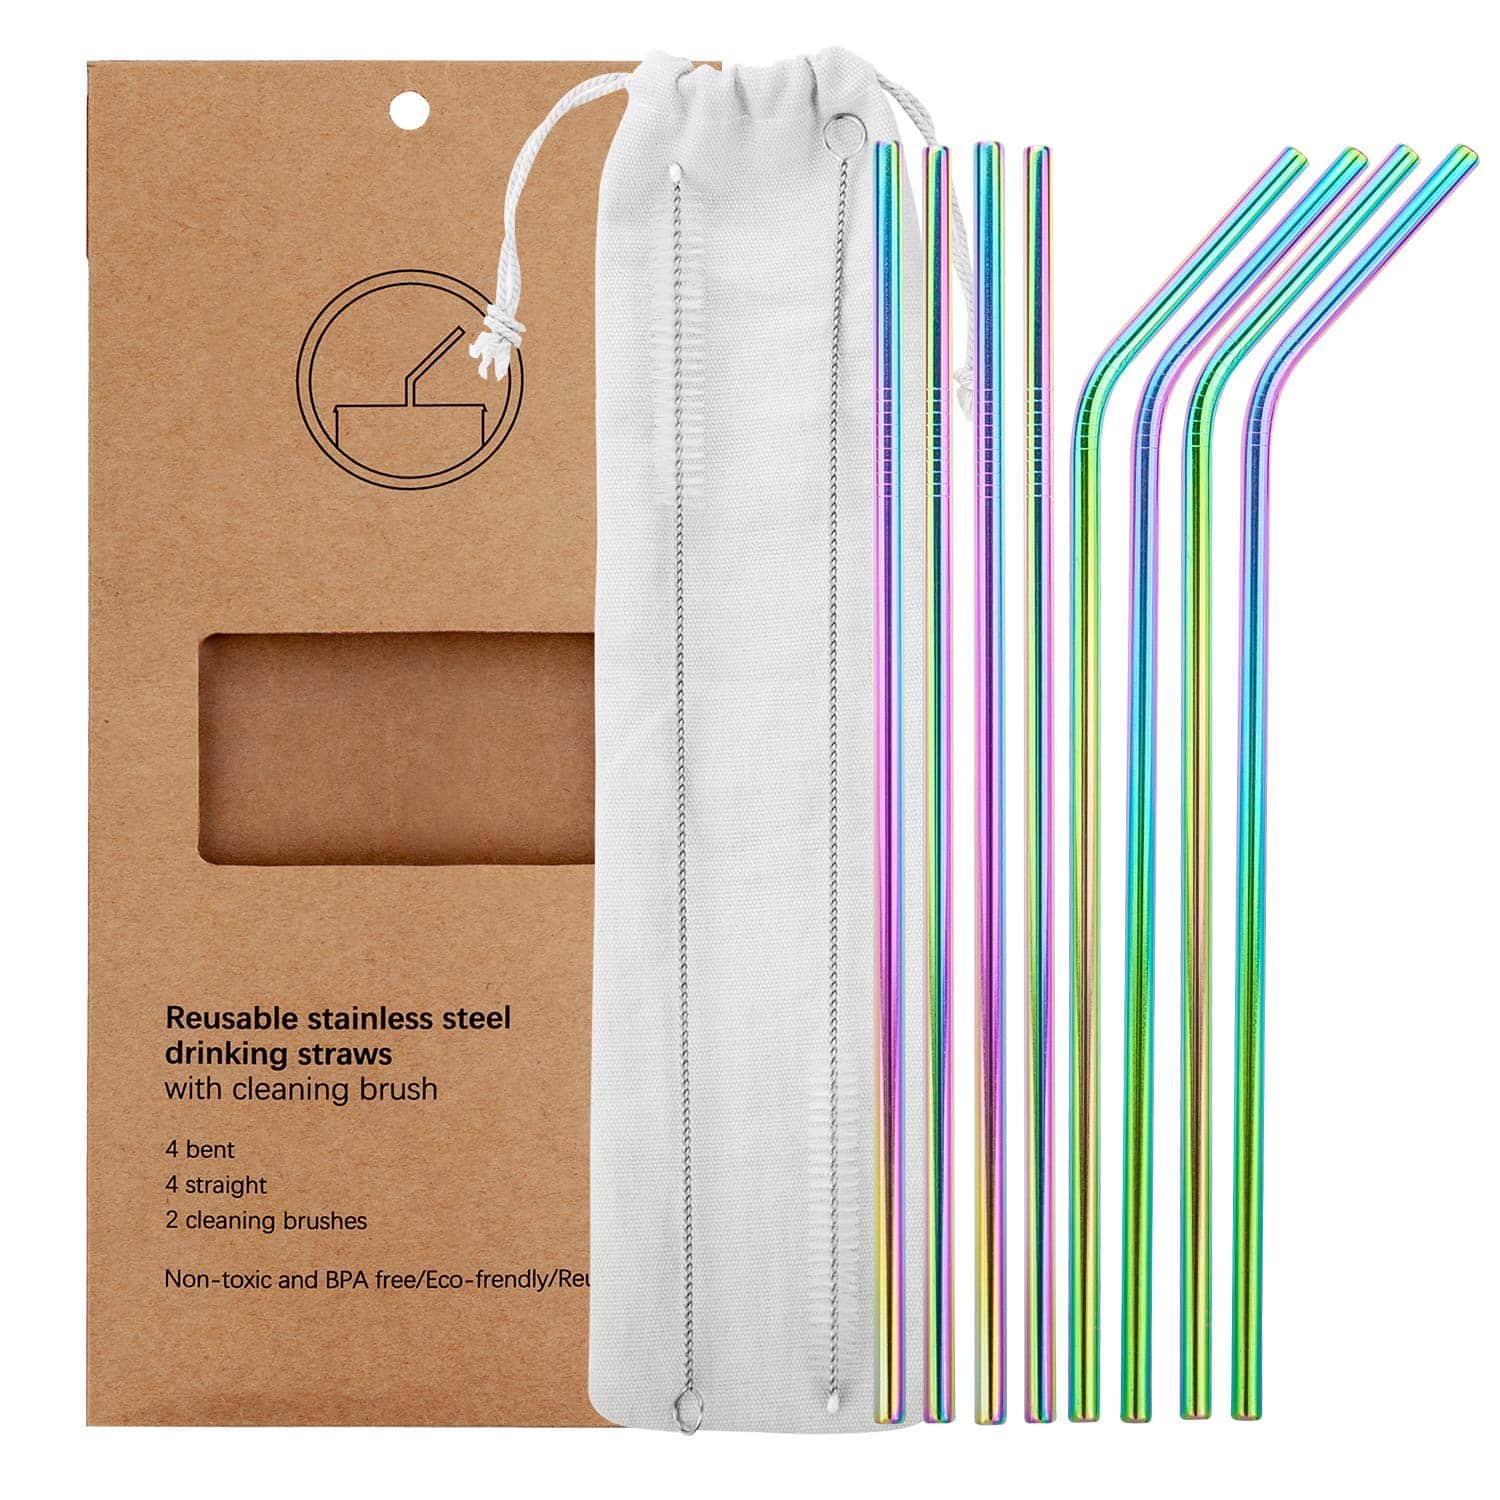 Reusable stainless steel drink straws with pouch.